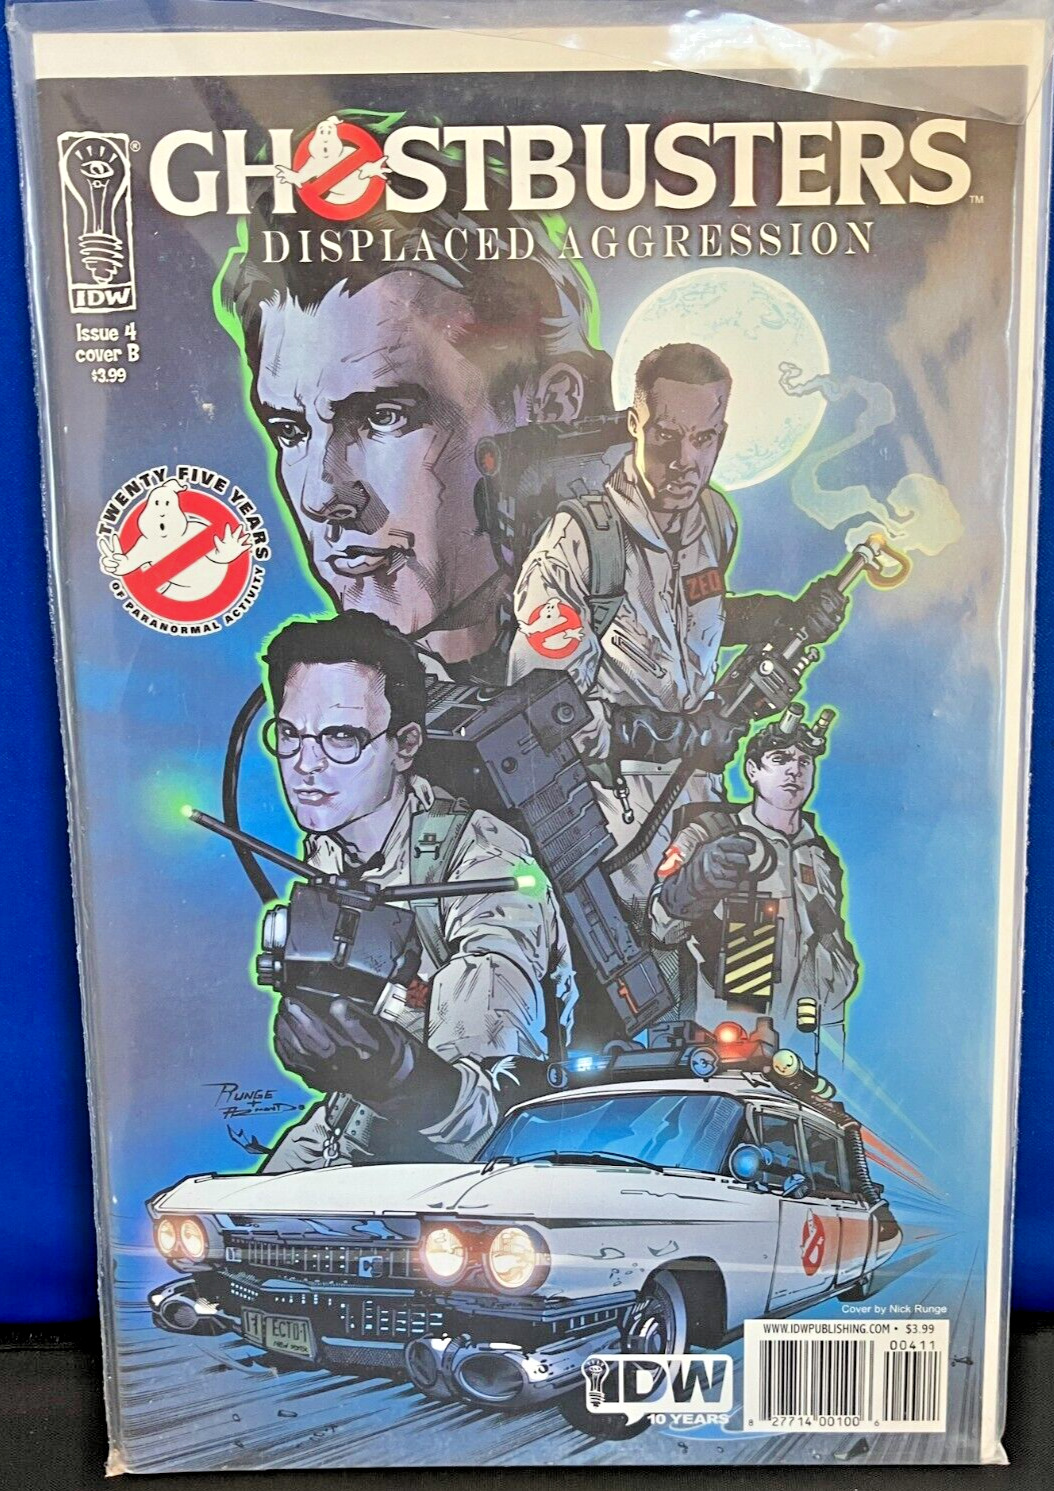 Ghostbusters Displaced Aggression #4B FN 2009 Actual comic 1st printing